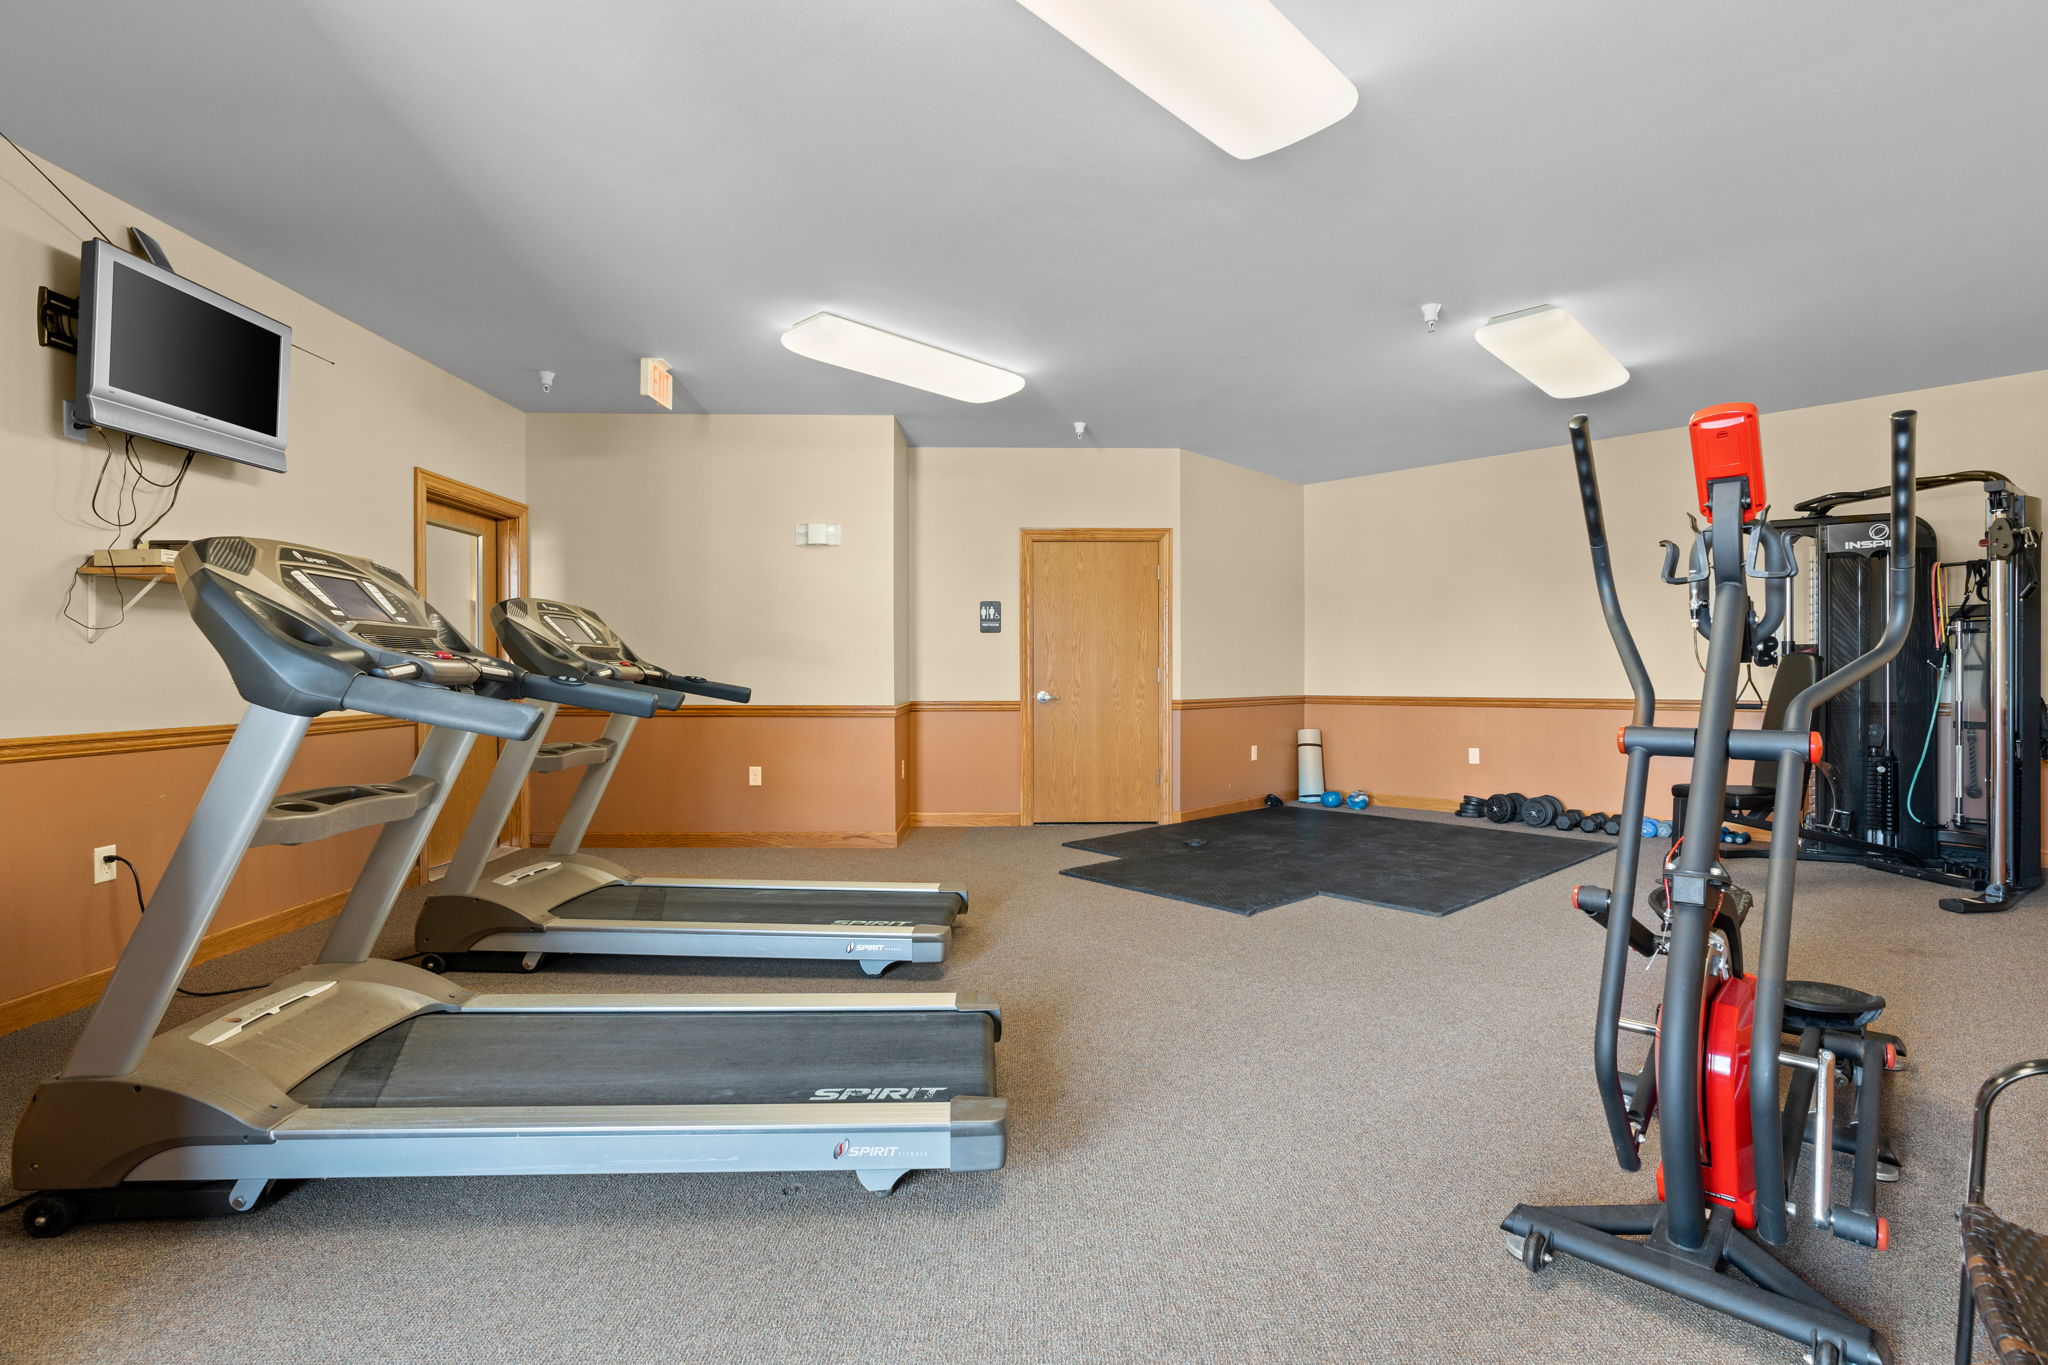 Community Workout Room